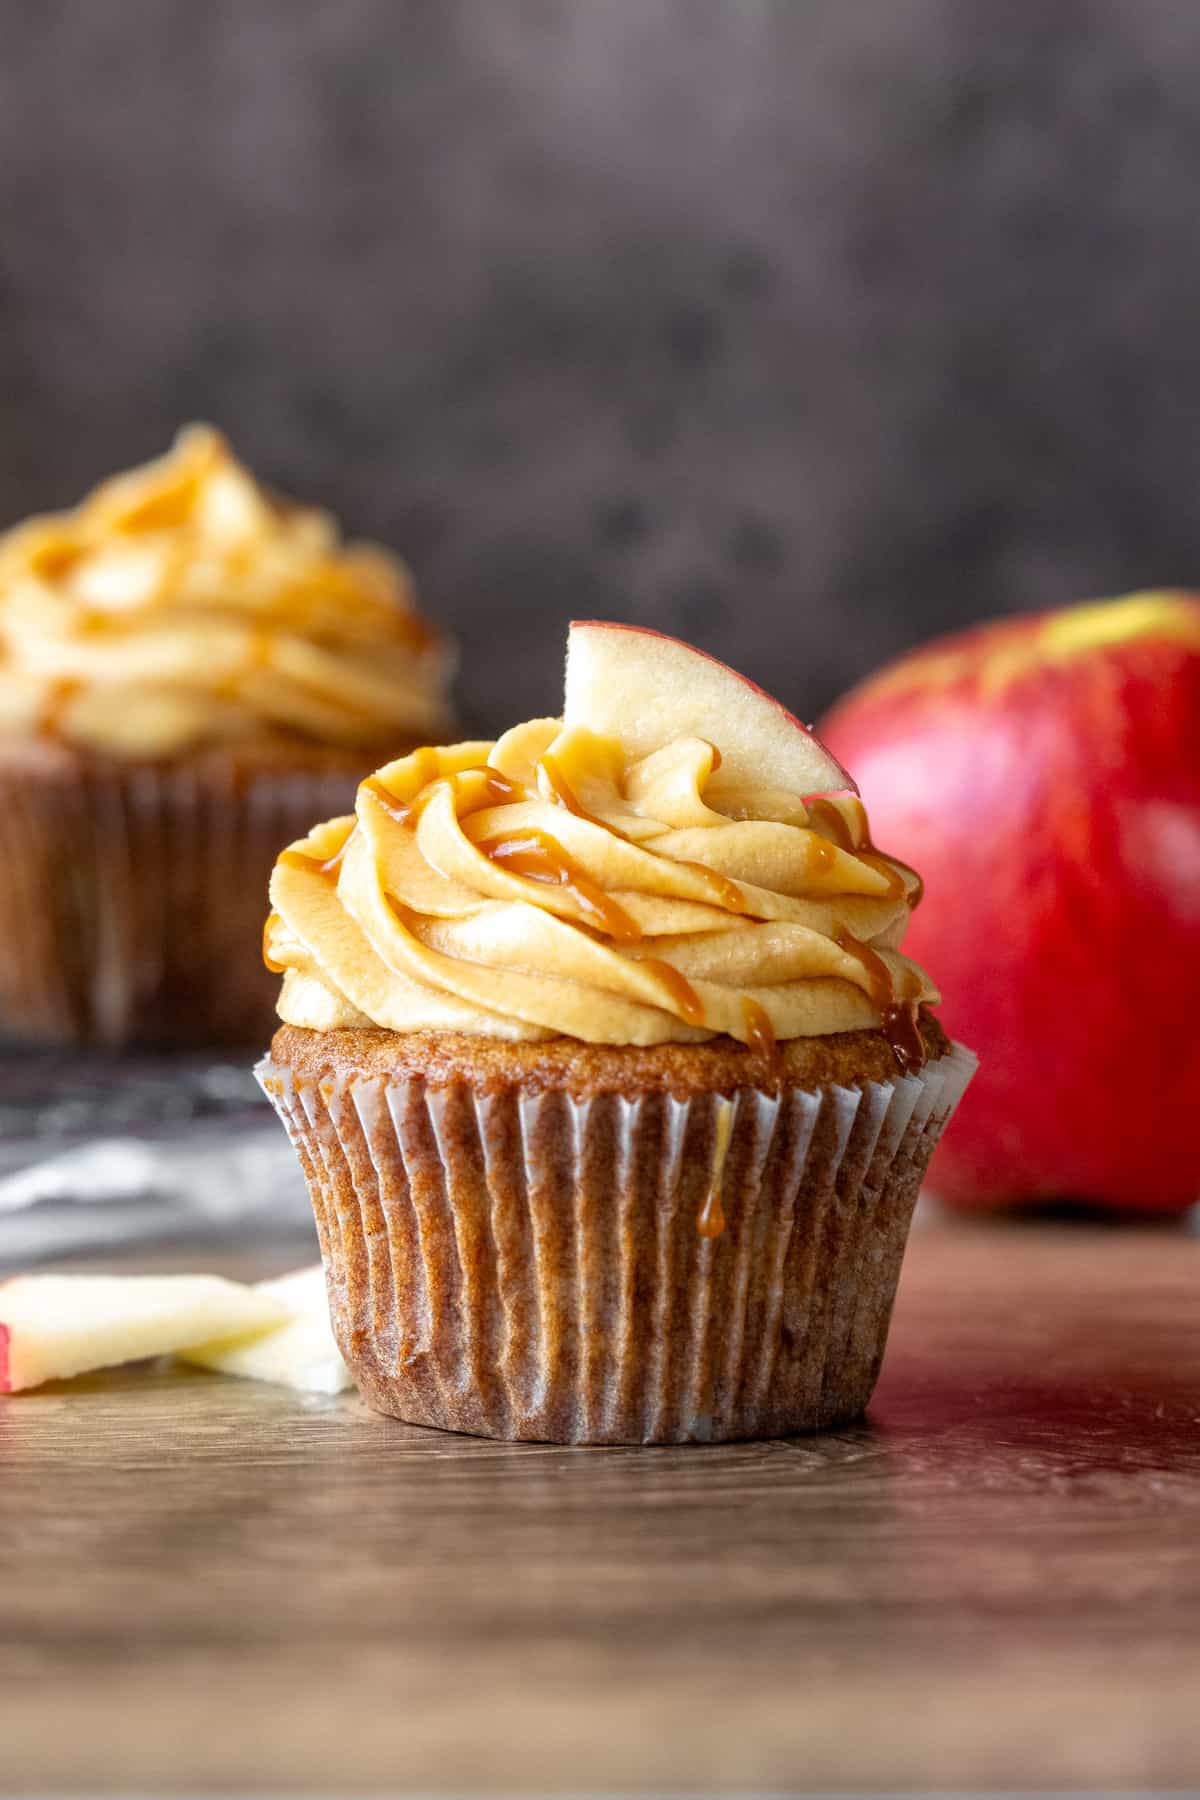 Caramel apple cupcake frosted with caramel frosting and topped with a drizzle of salted caramel and a slice of apple